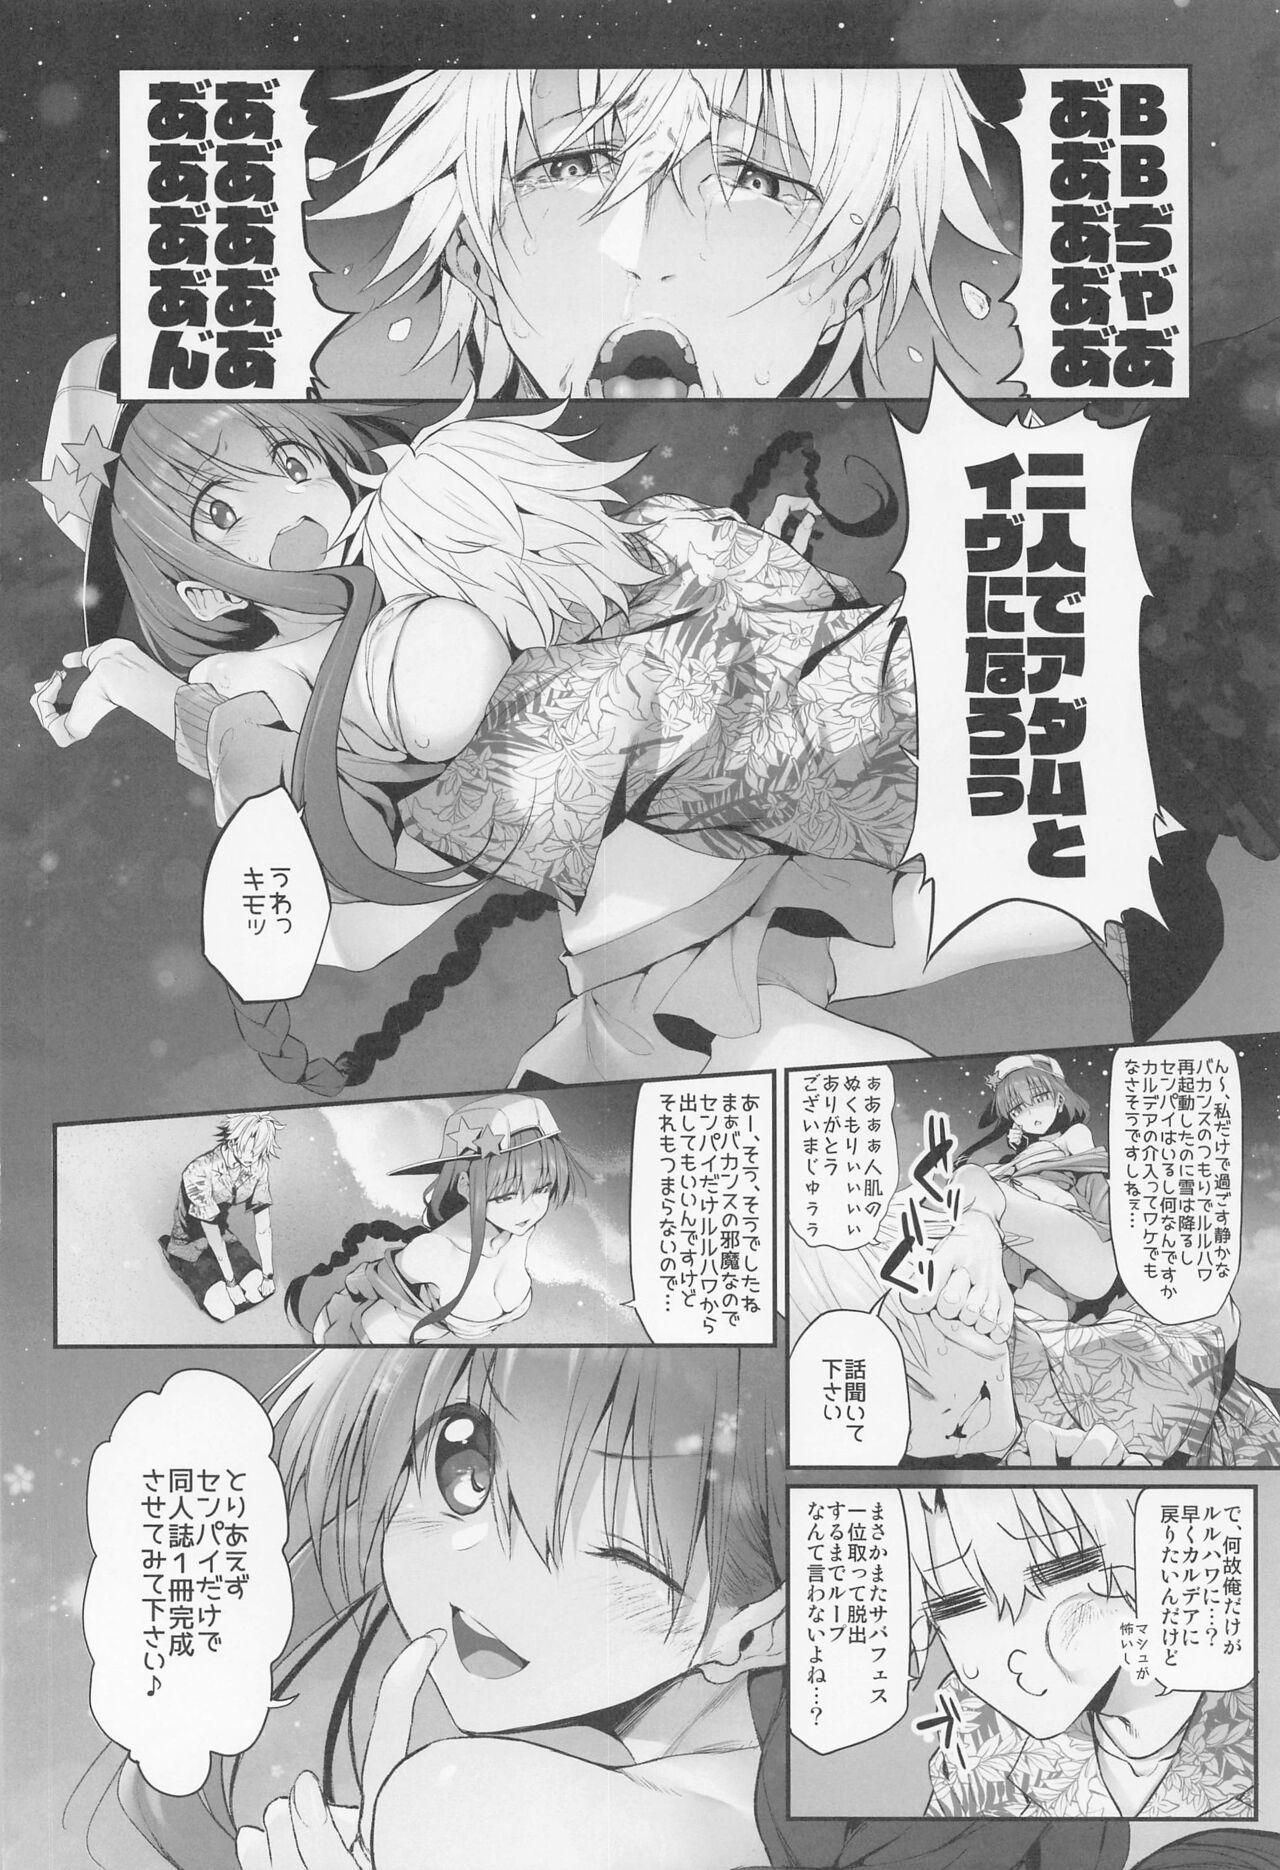 Voyeur Marked-girls Collection Vol. 6 - Fate grand order Ex Girlfriends - Page 6